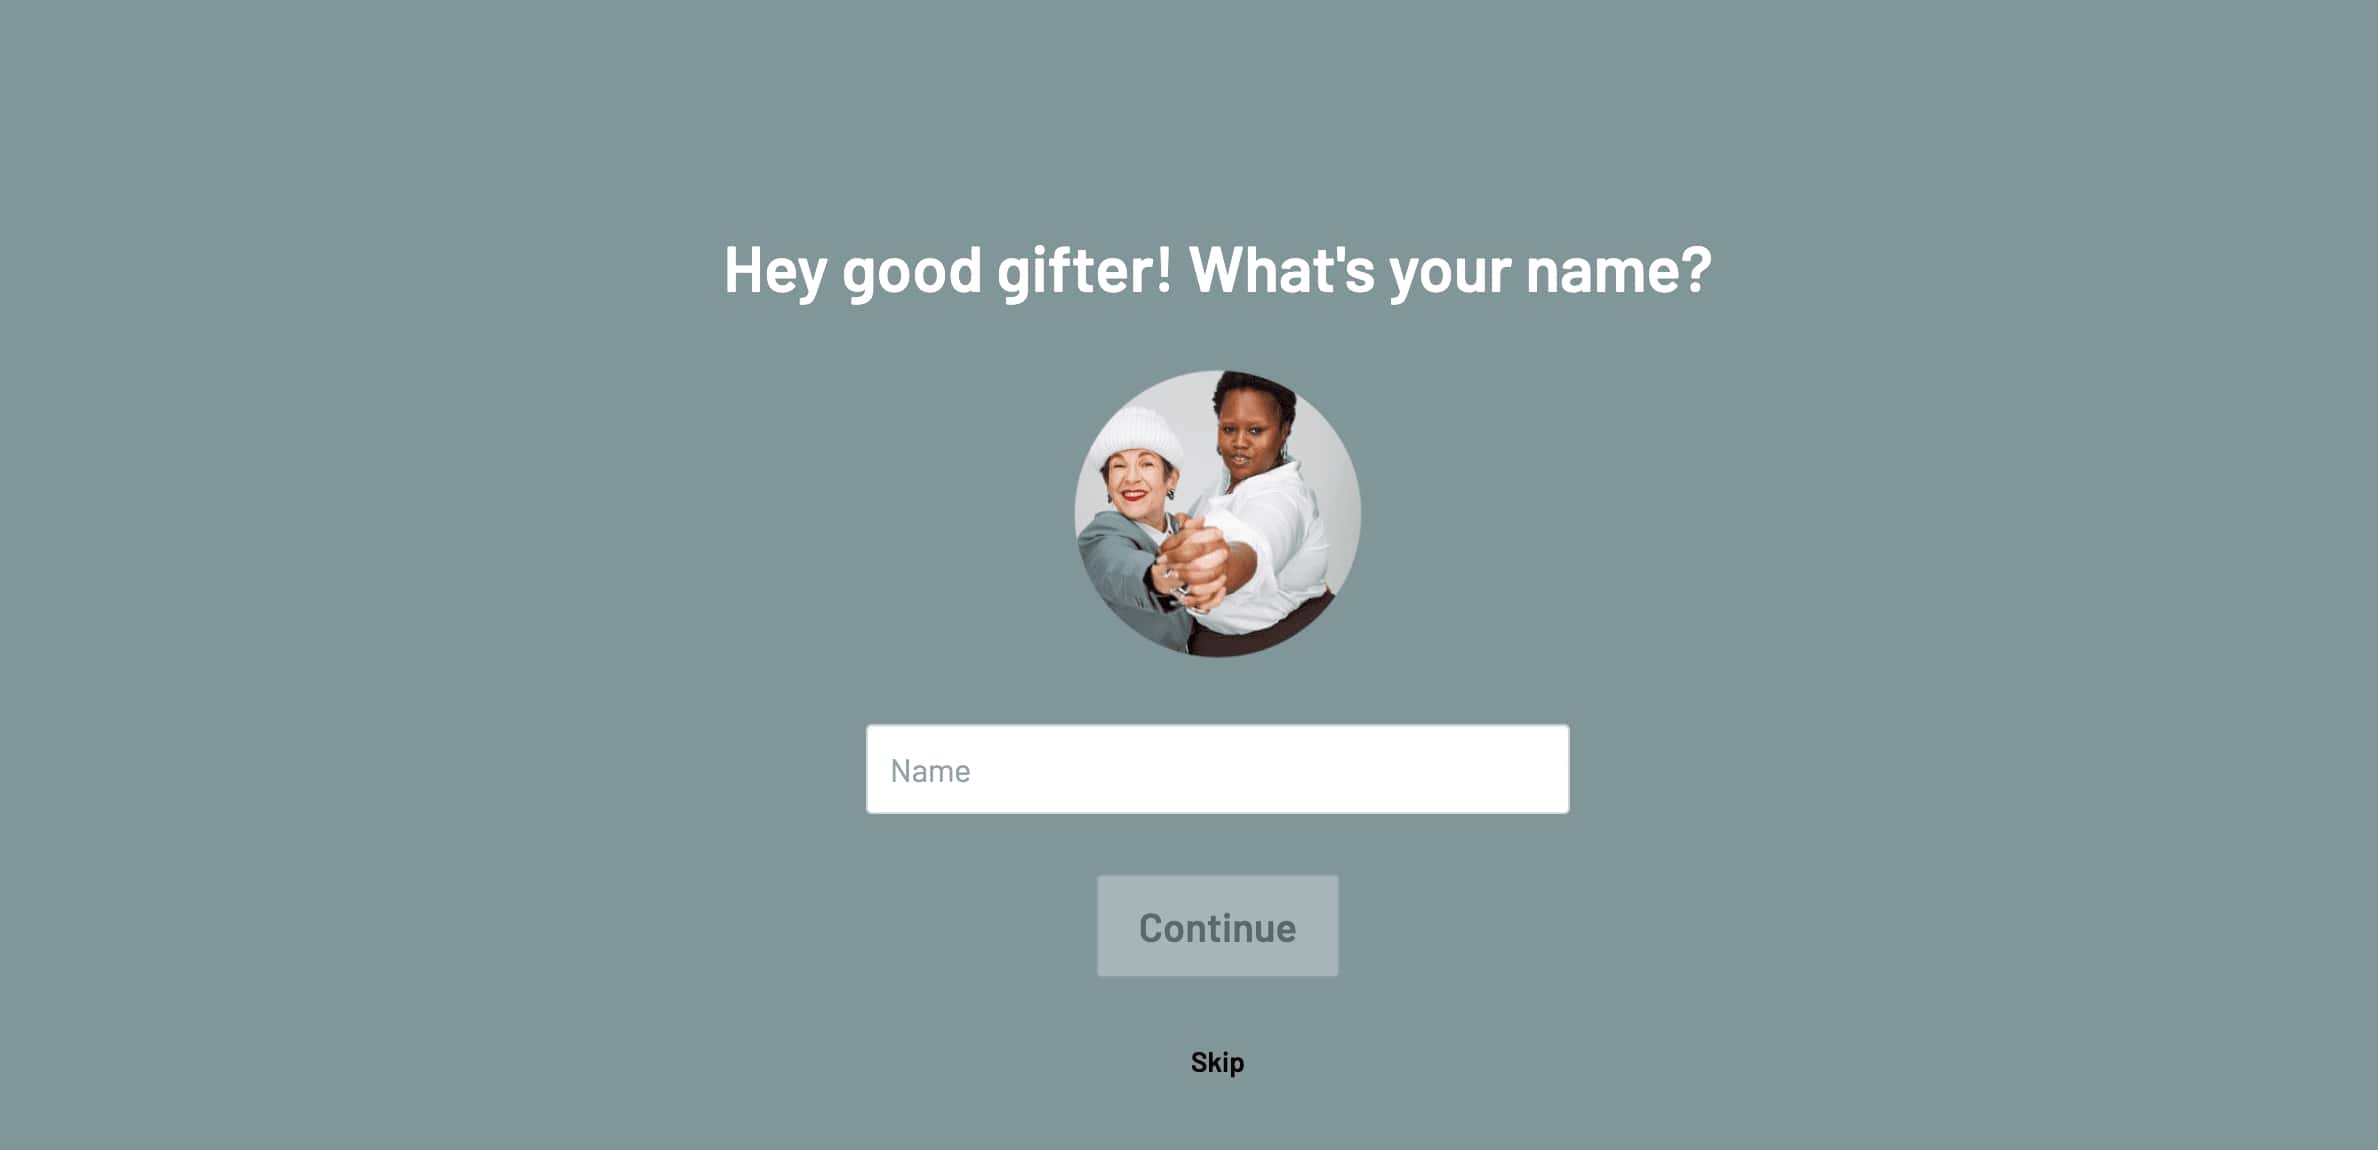 Universal Standards online quiz that asks the customer to share their name to continue.